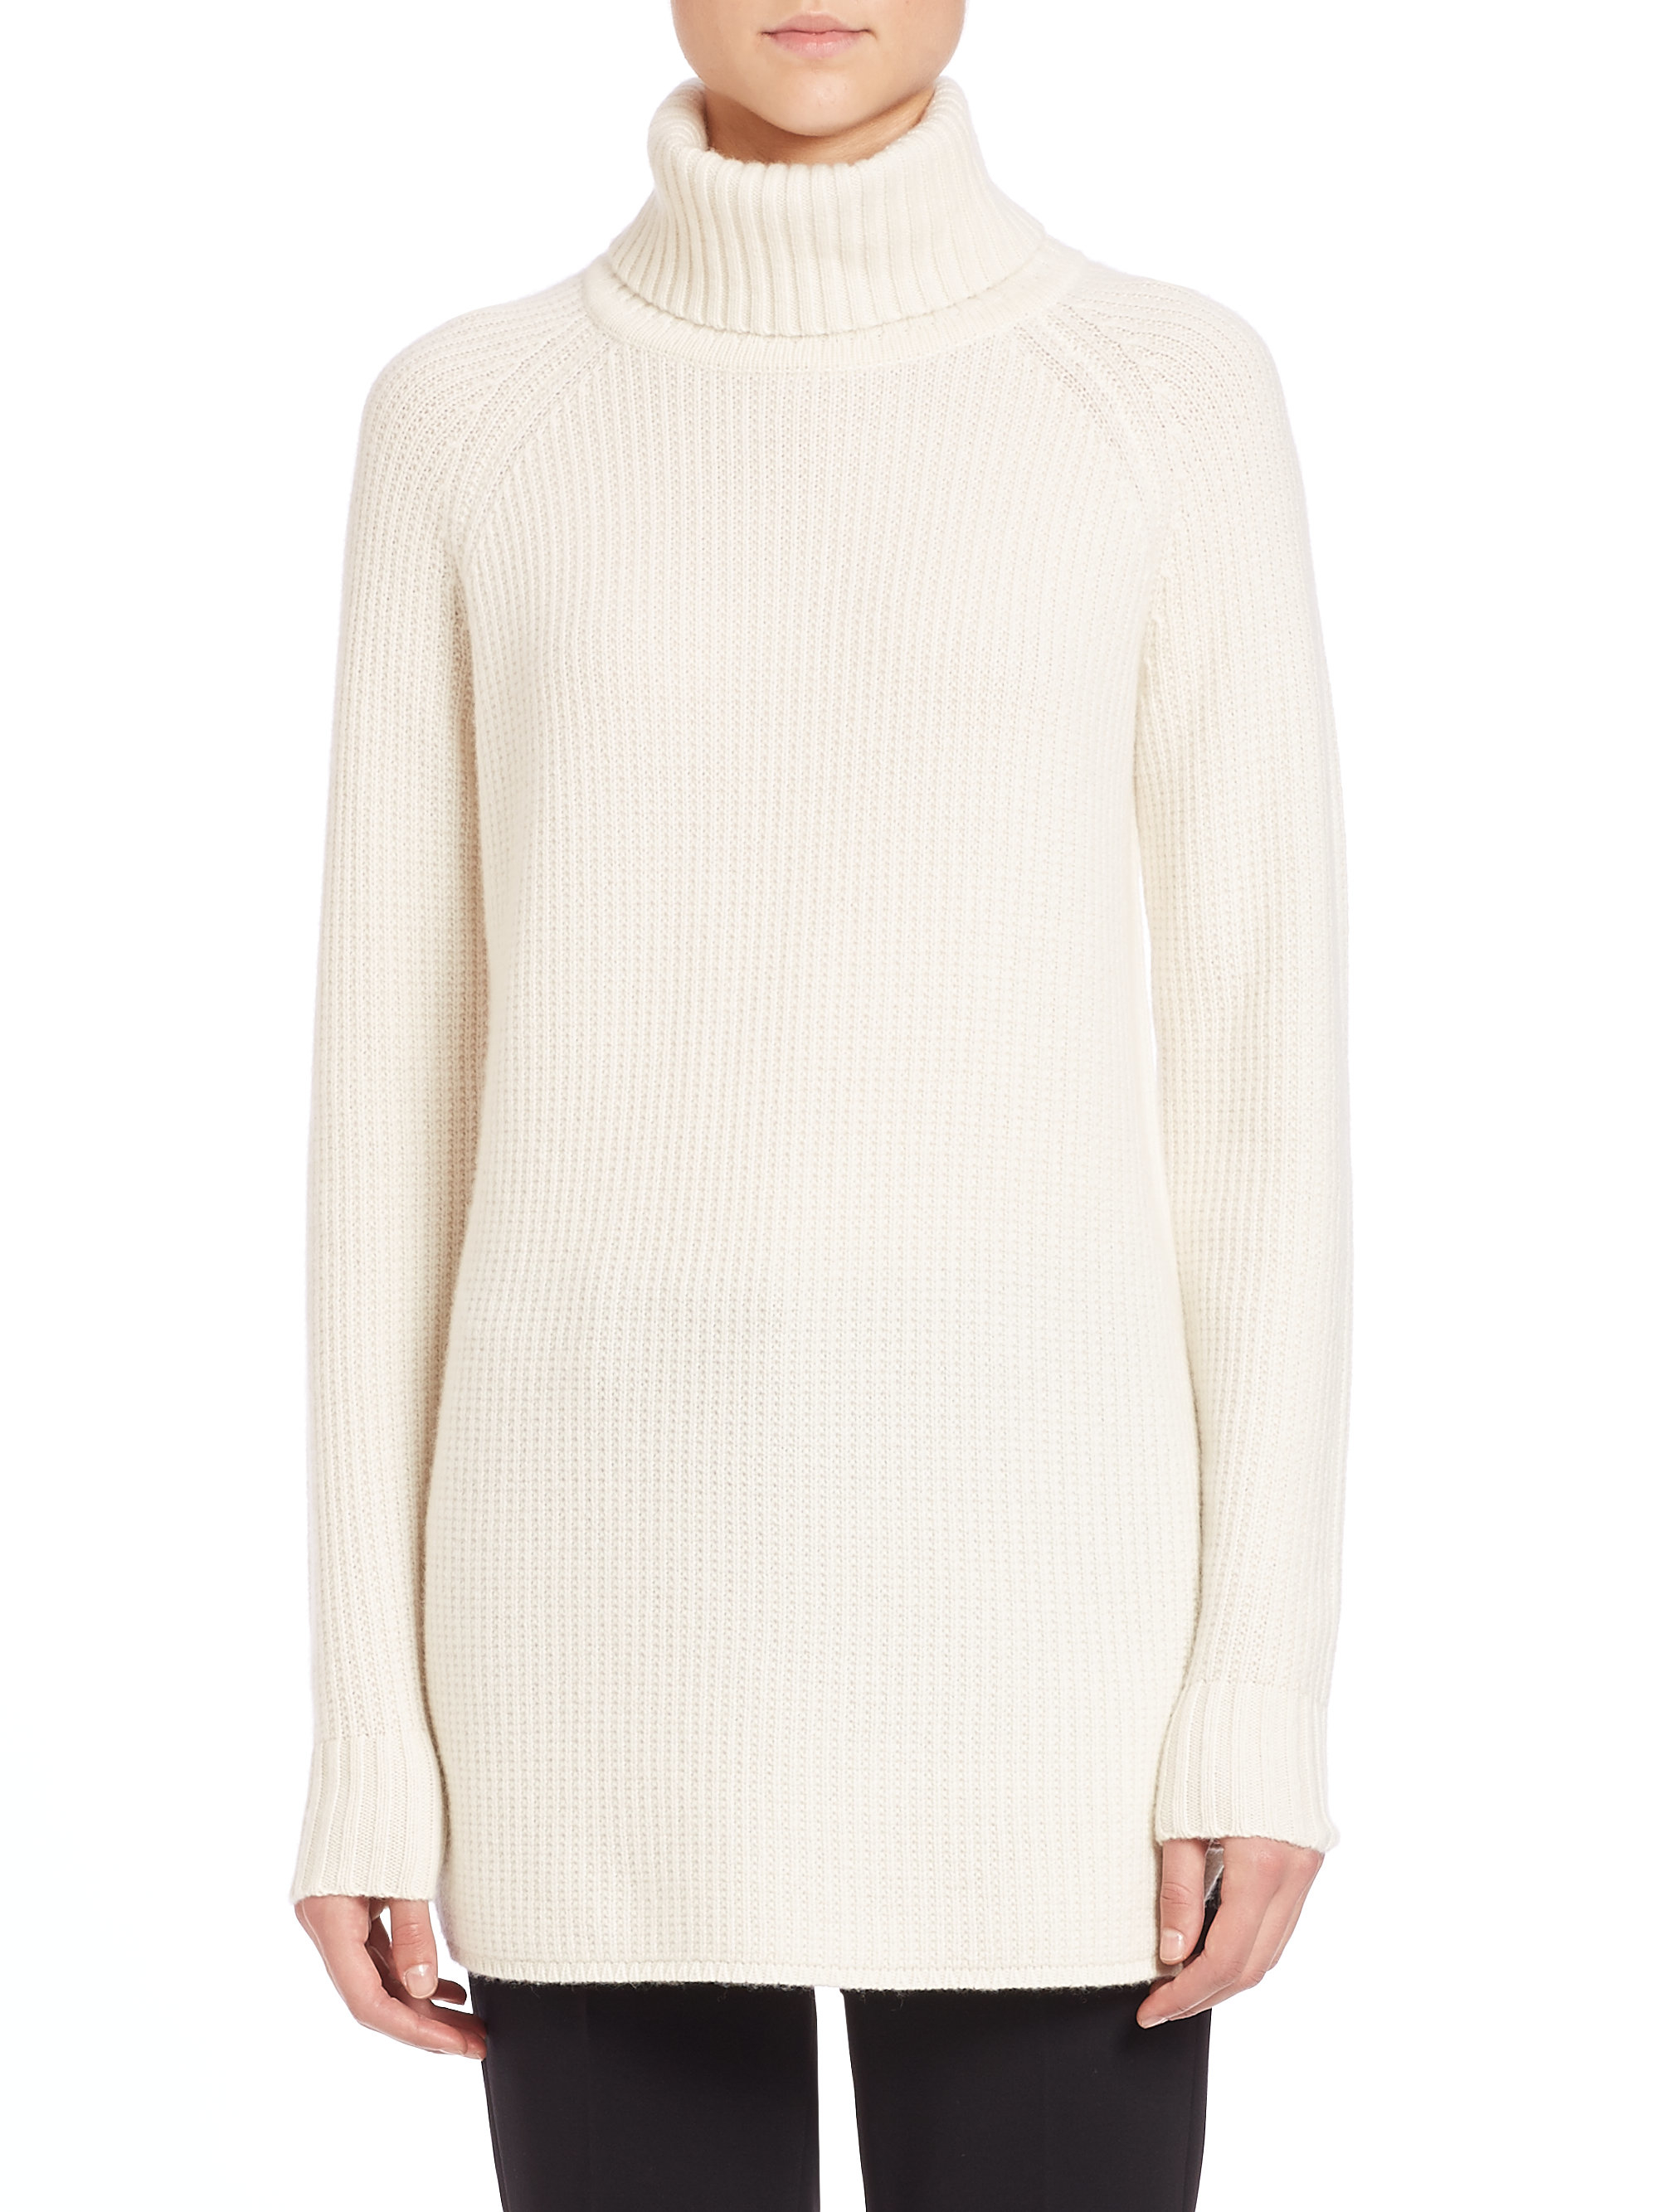 Lyst - Theory Eurala Cashmere Turtleneck Sweater in White